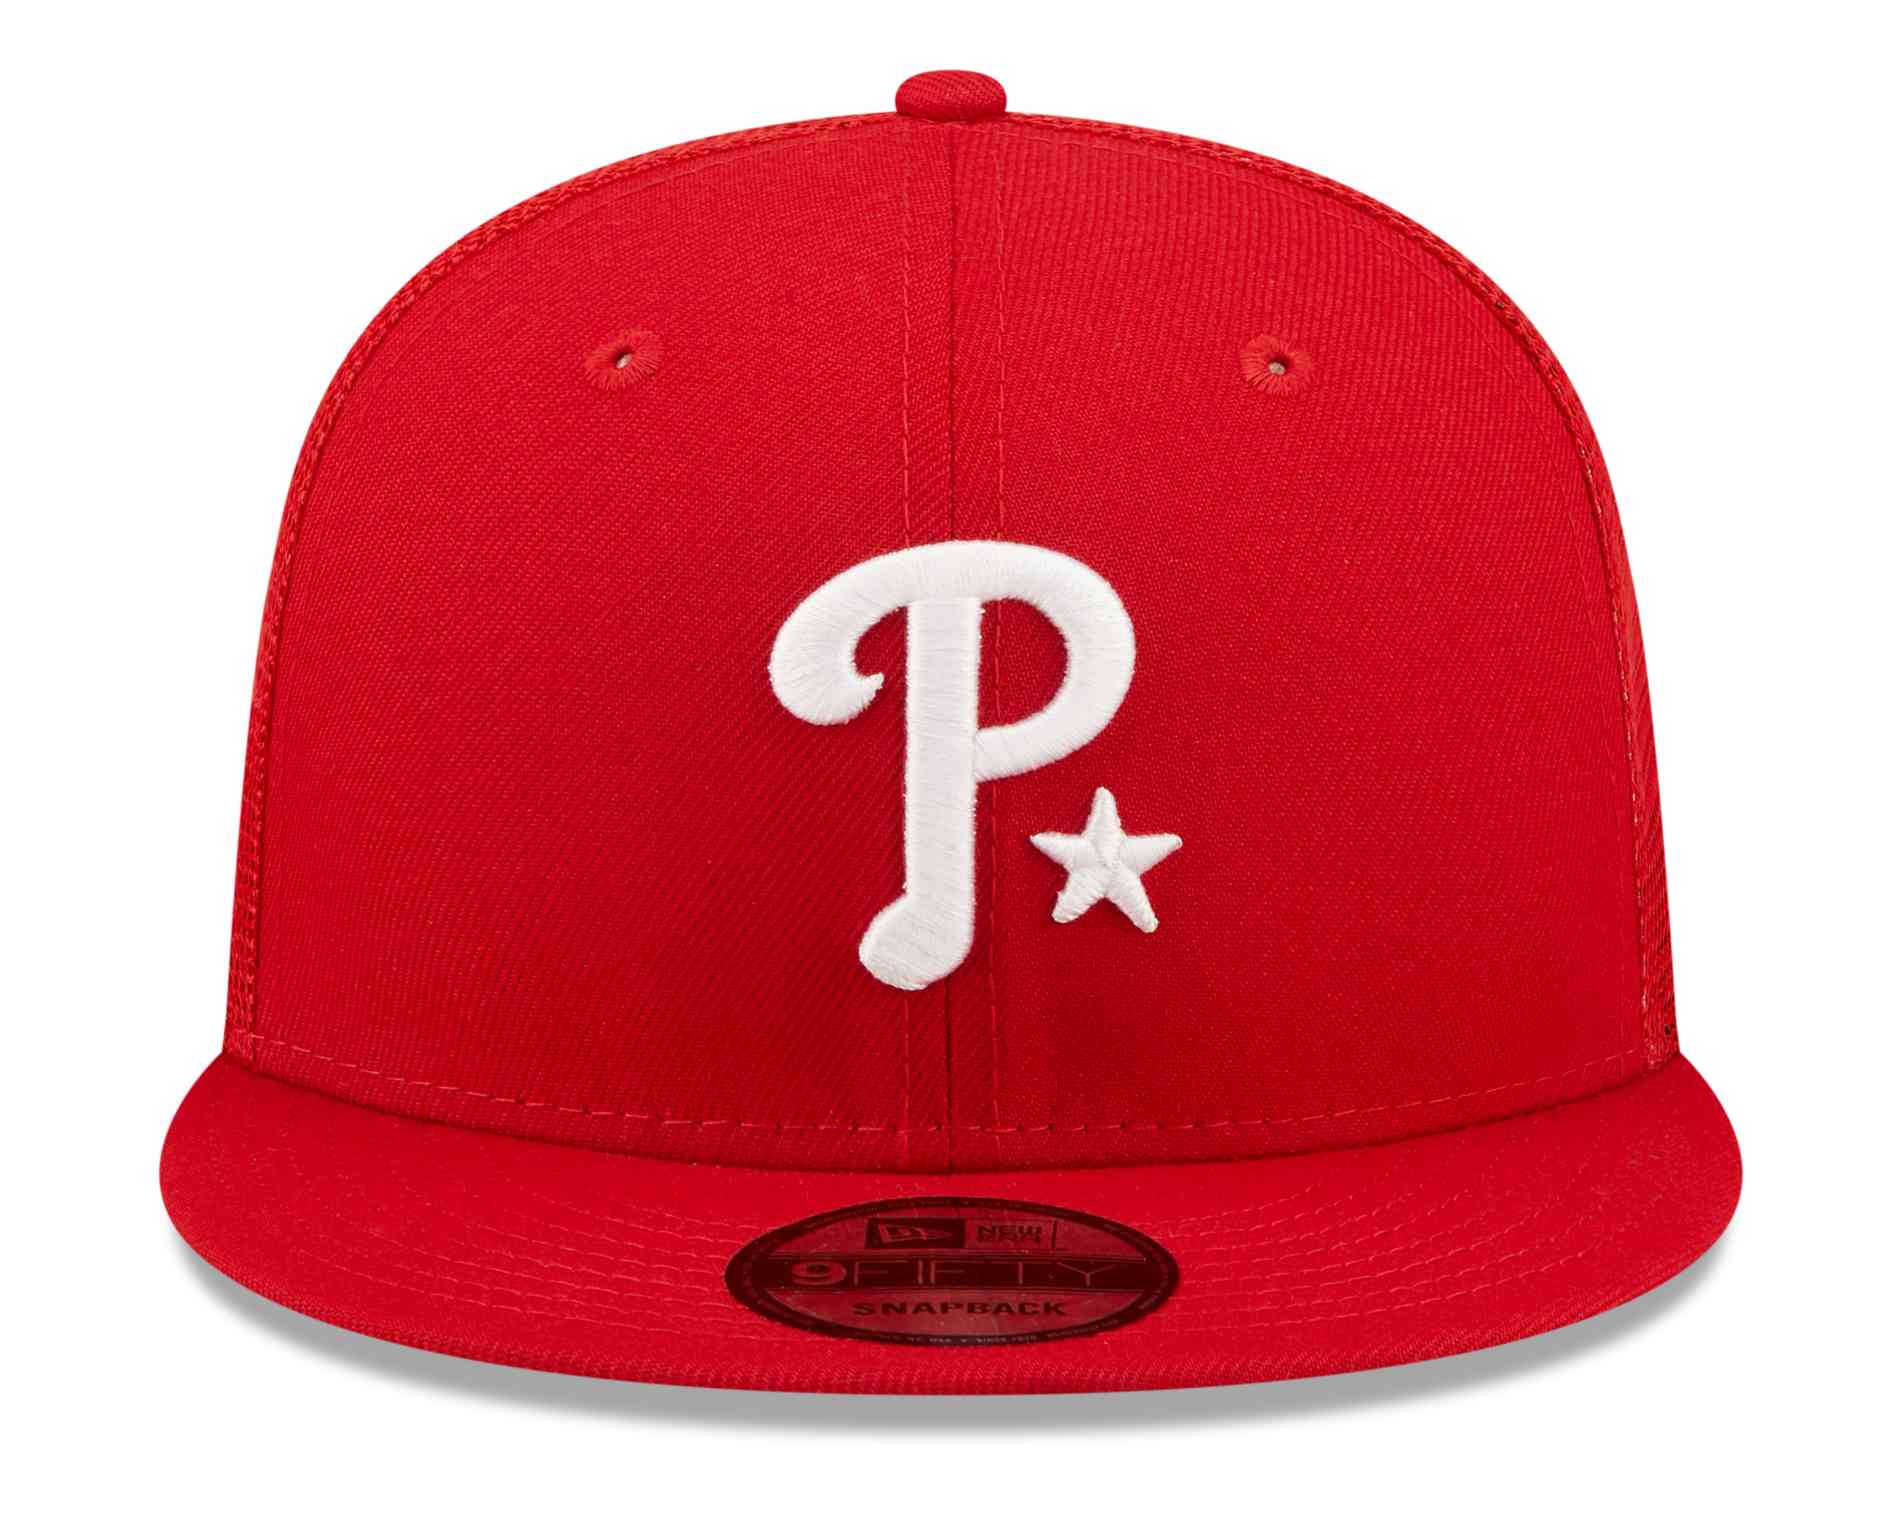 New Era - MLB Philadelphia Phillies All Star Game Patch 9Fifty